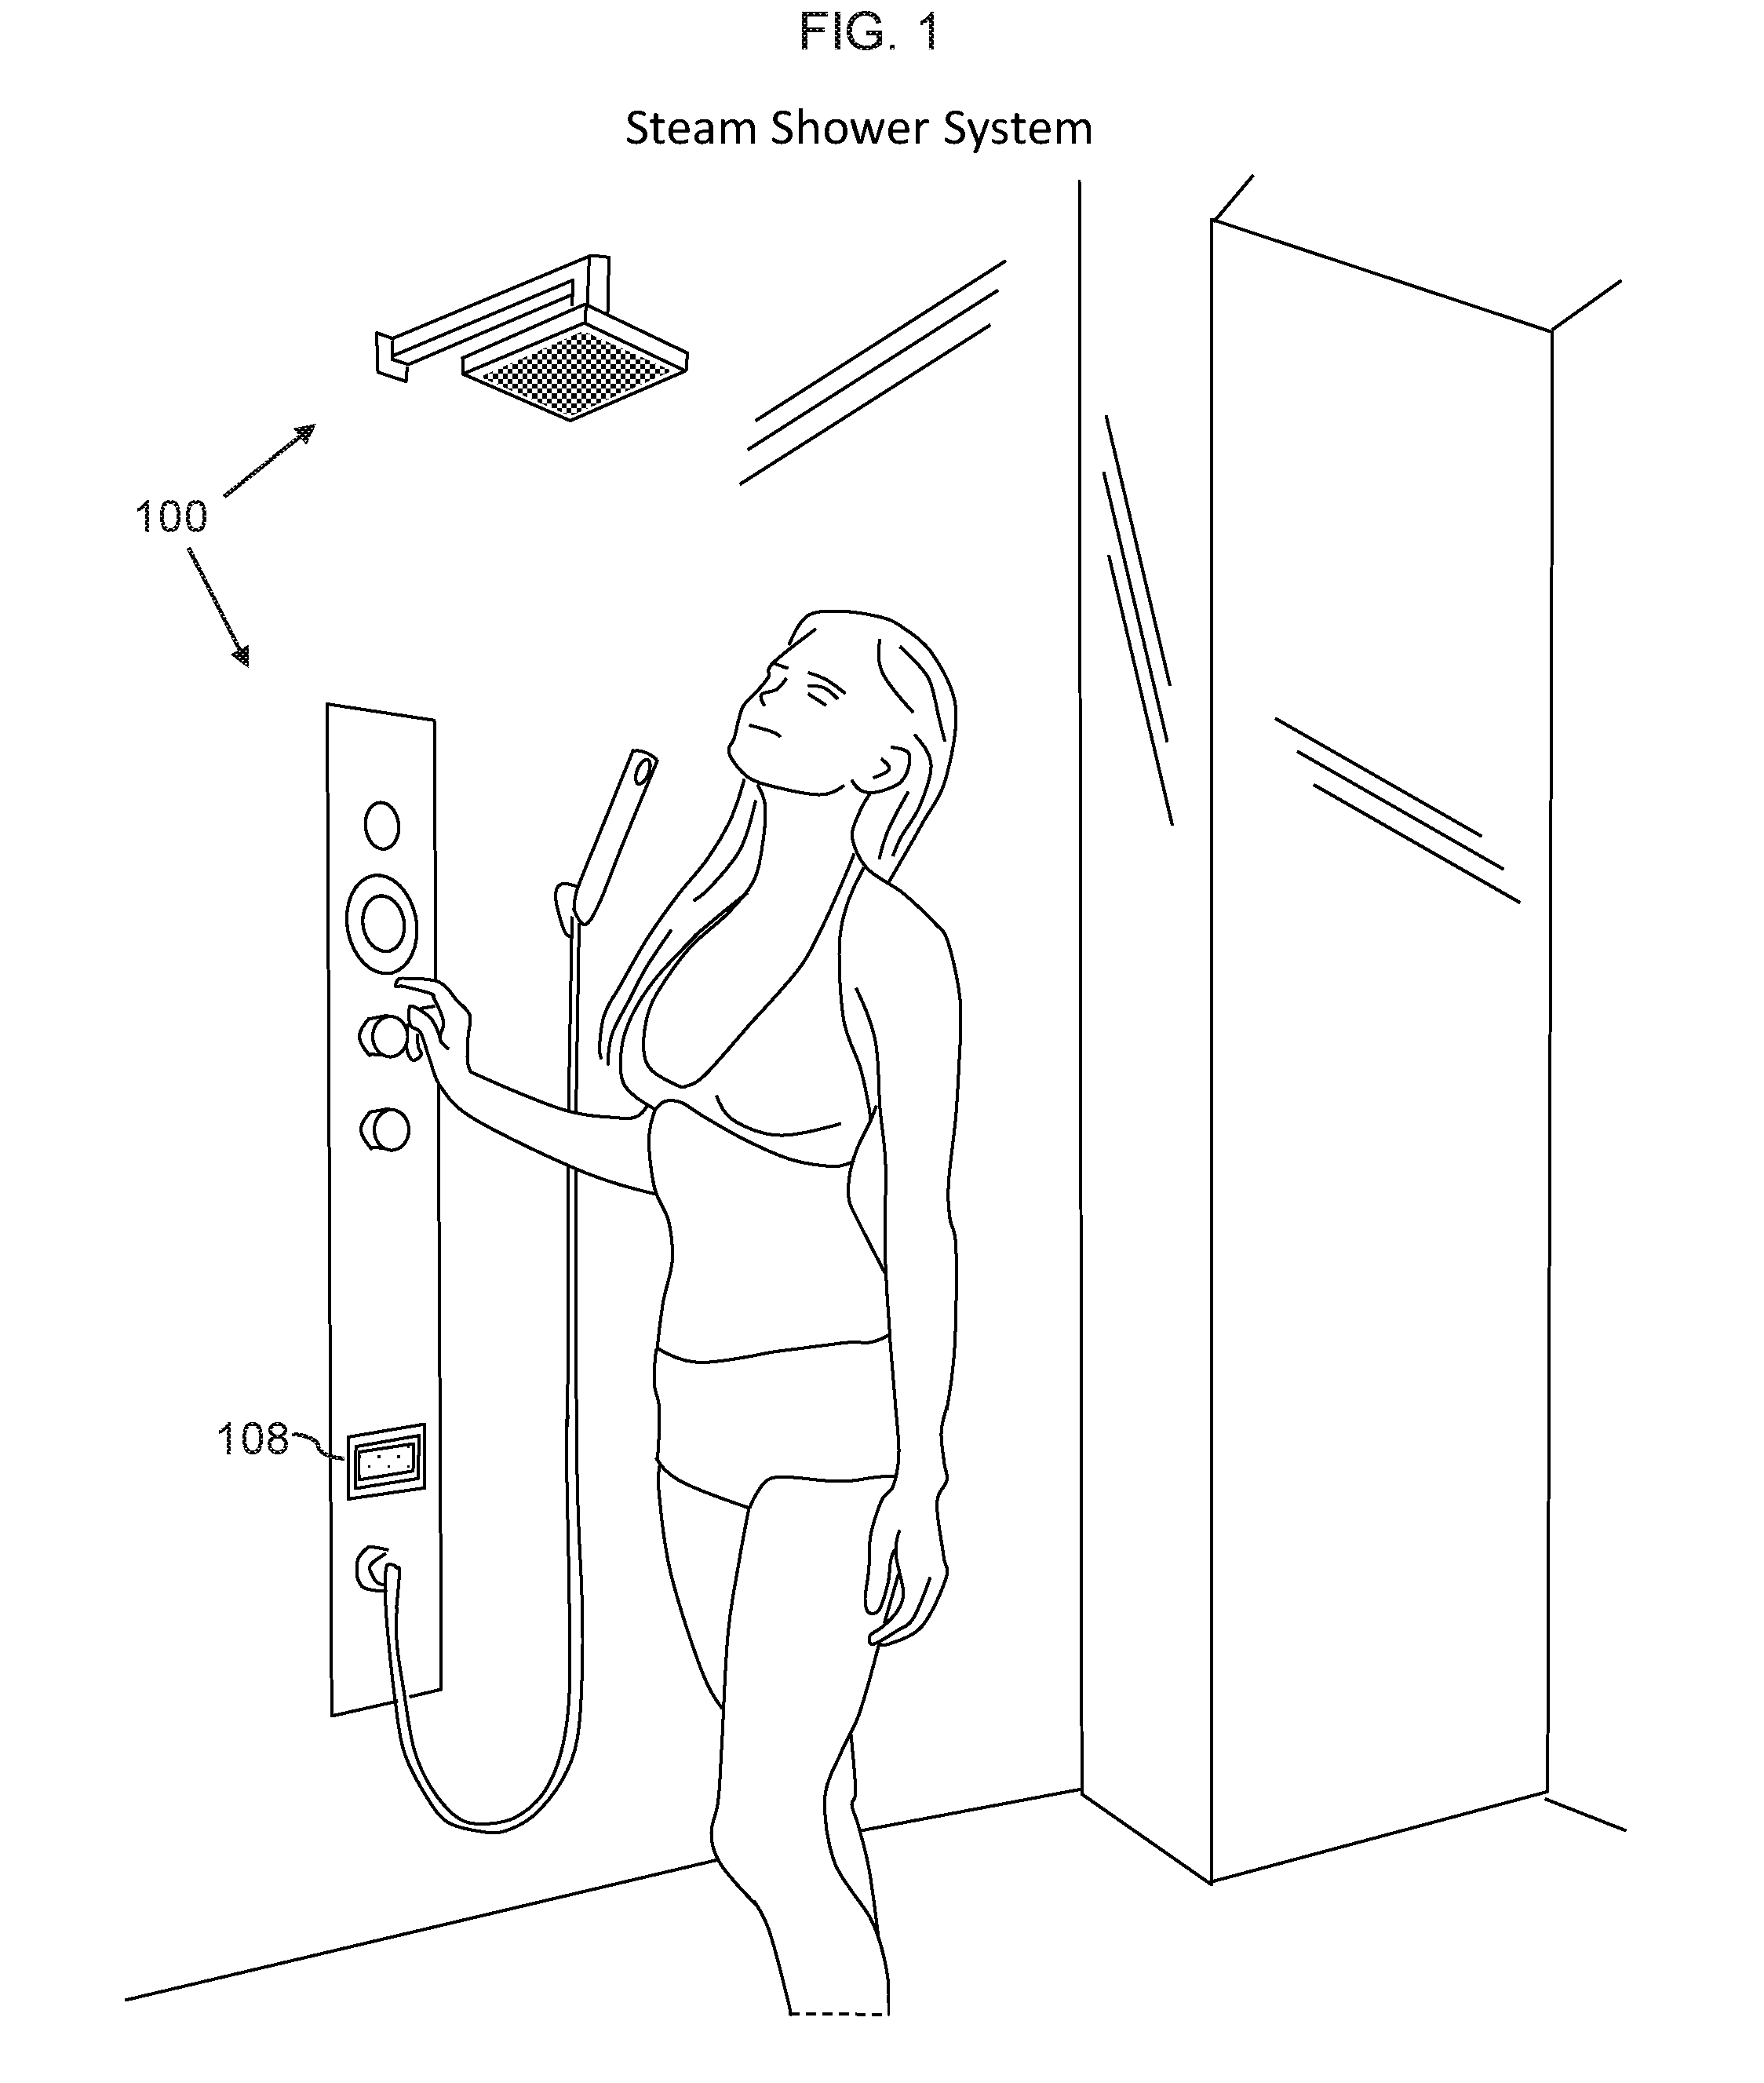 Steam shower system and device